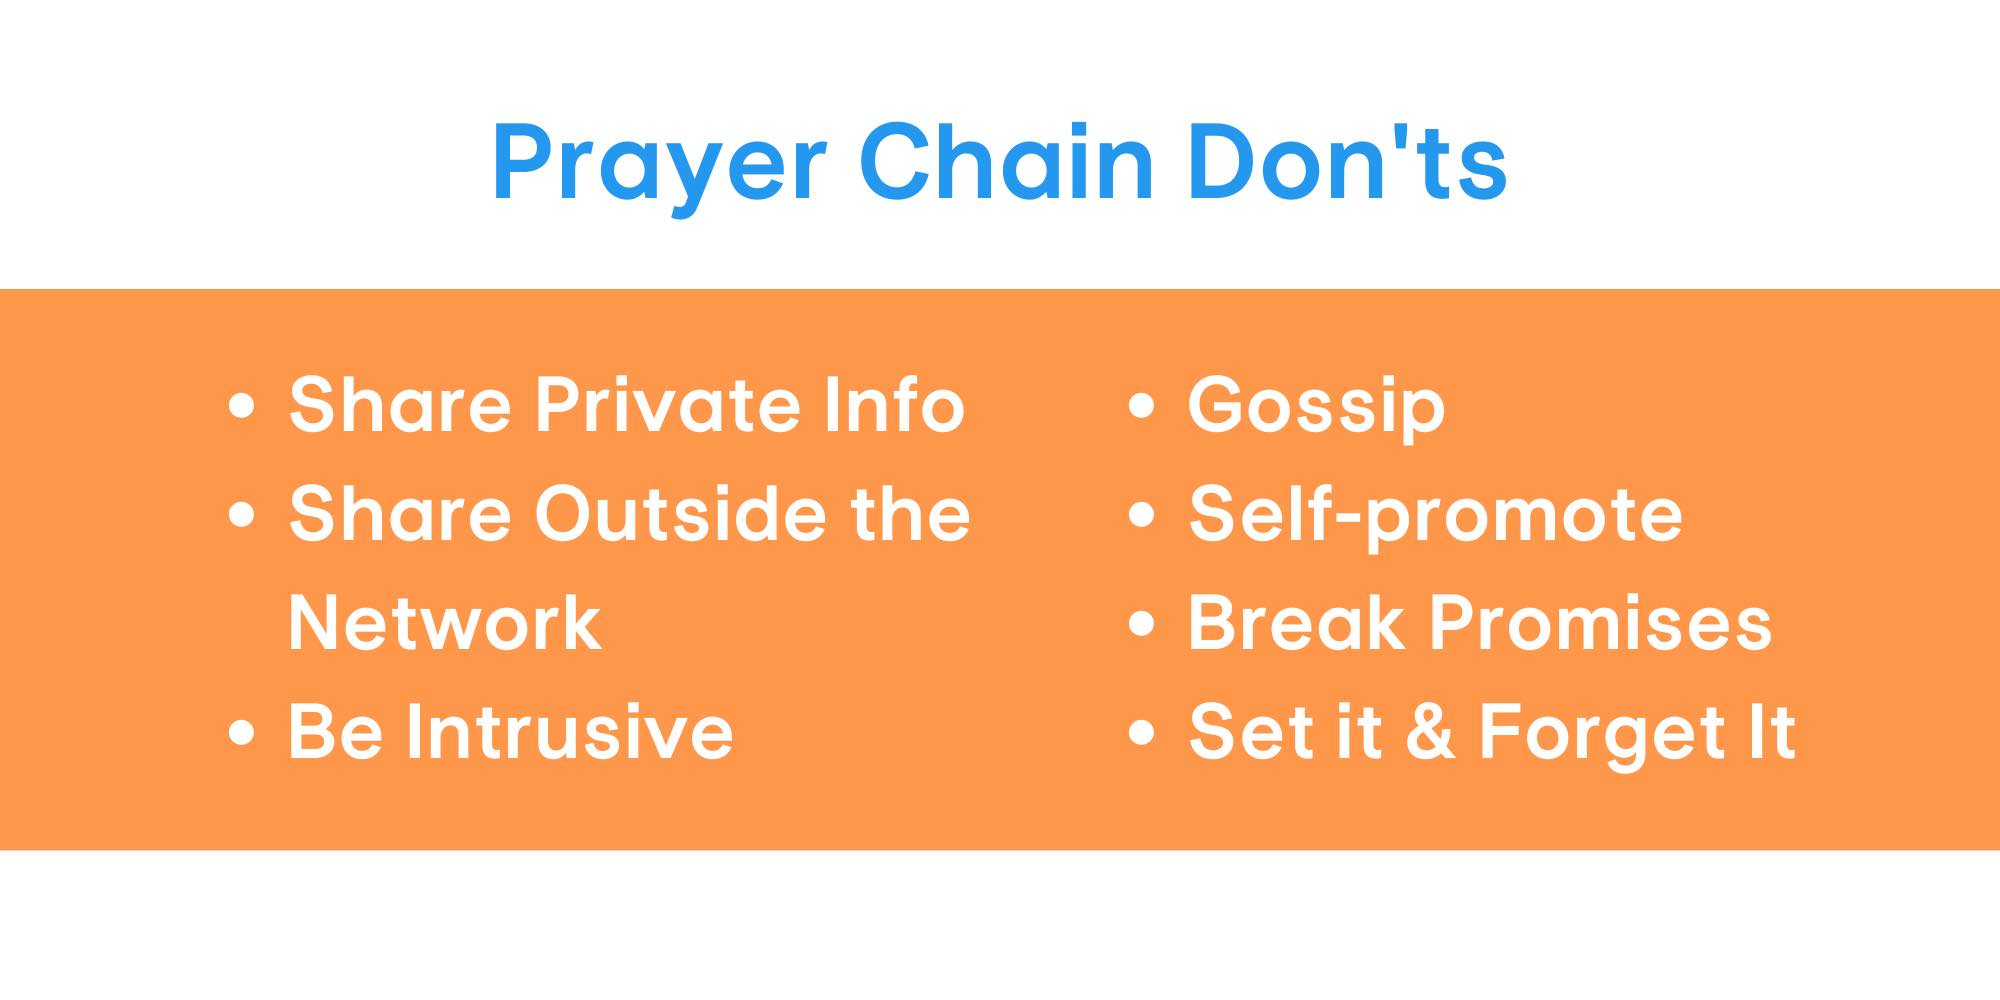 This is what you should not do in your prayer ministry